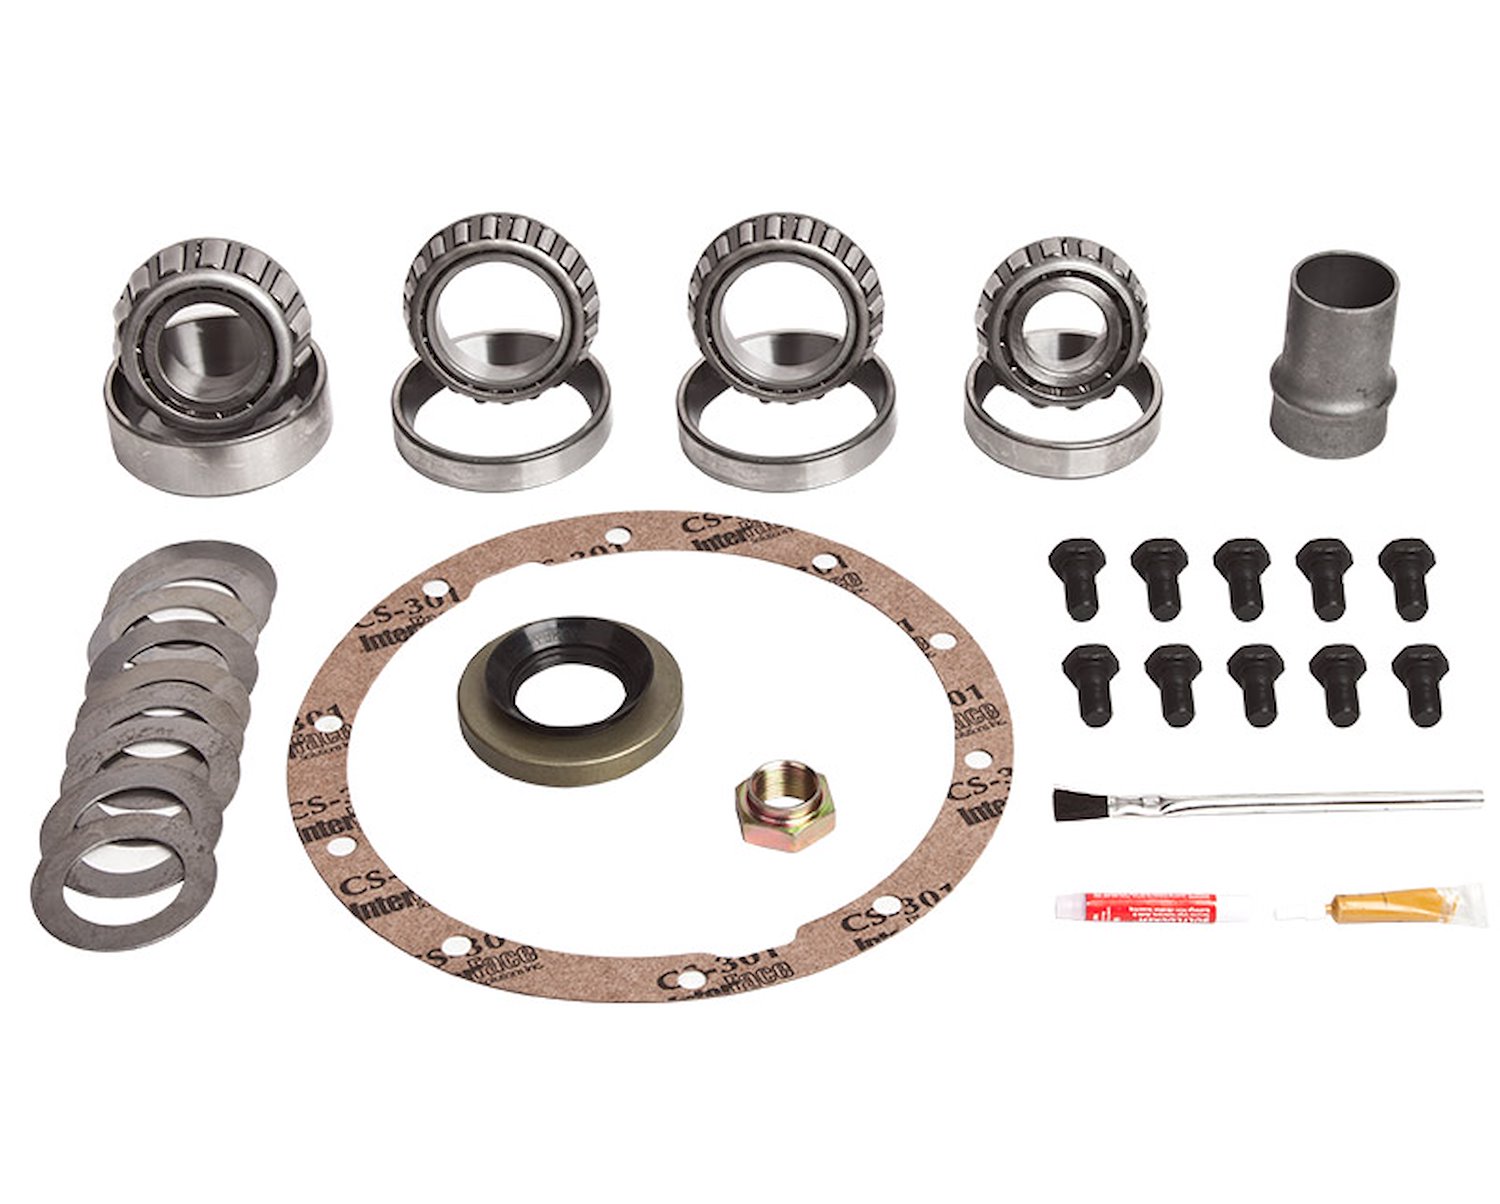 Differential Set Up Kit V6 & High Pinion